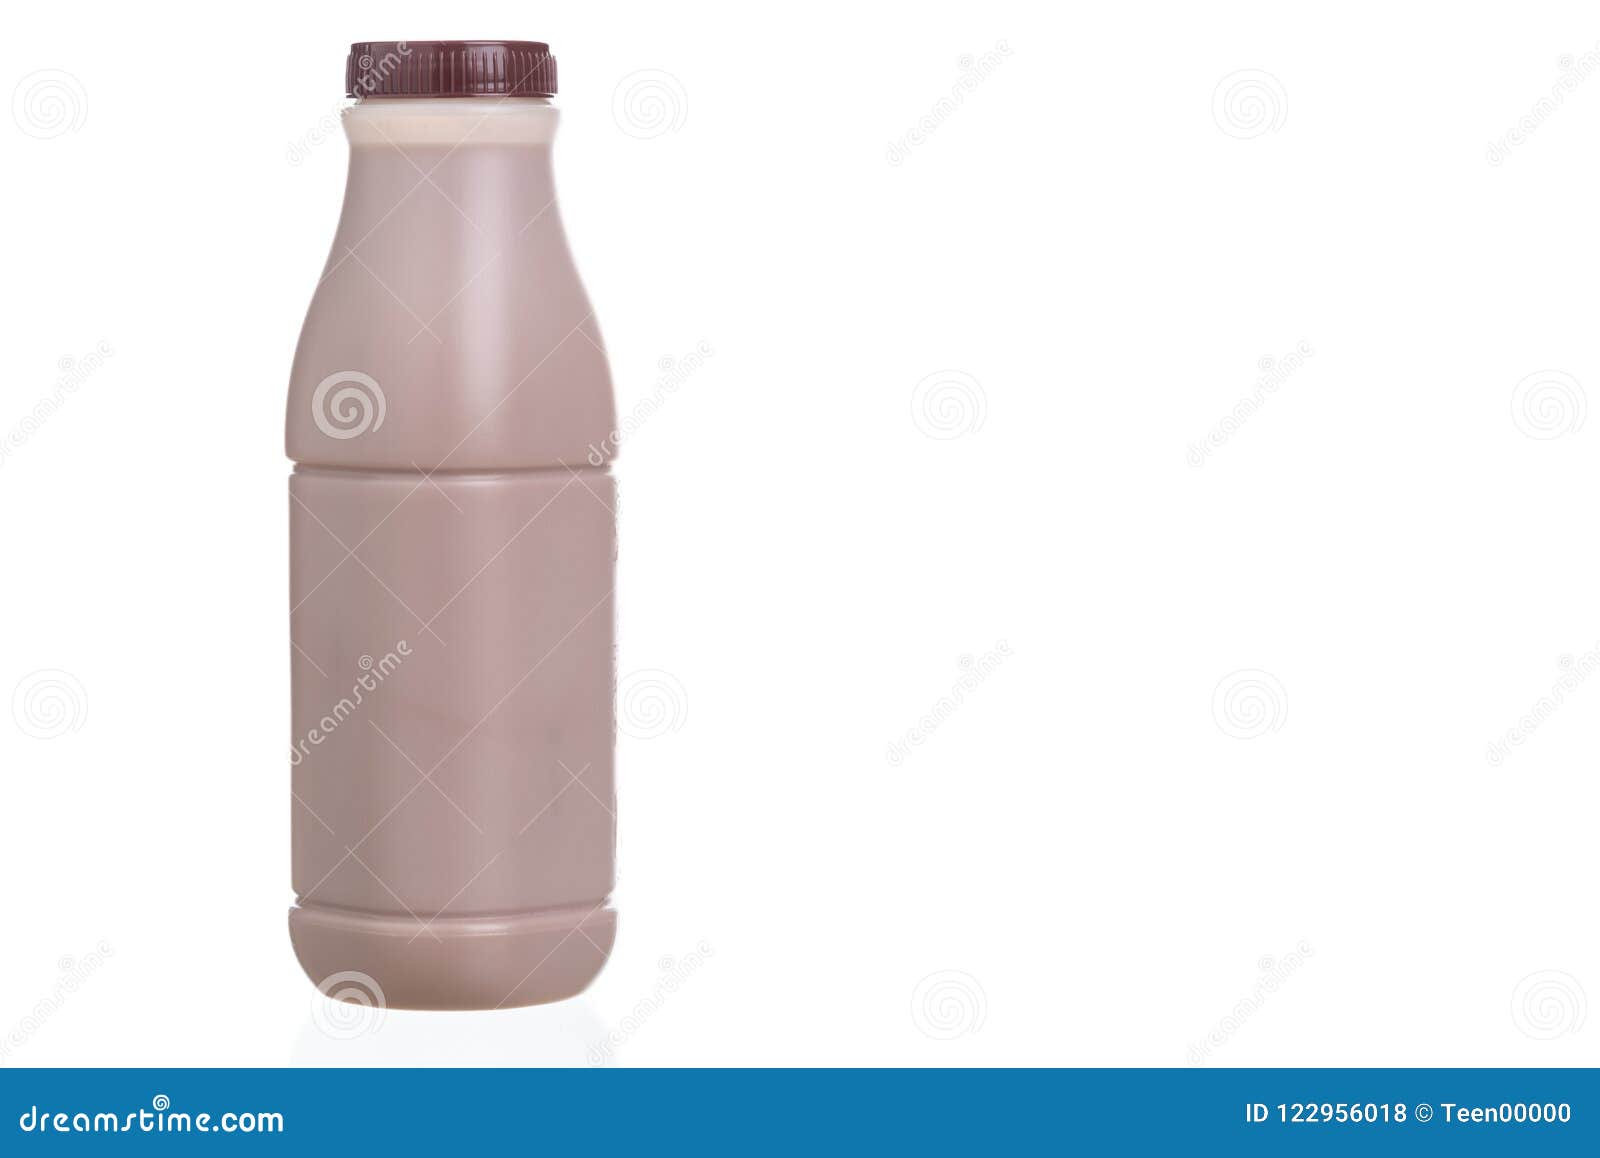 1 096 513 Milk Photos Free Royalty Free Stock Photos From Dreamstime